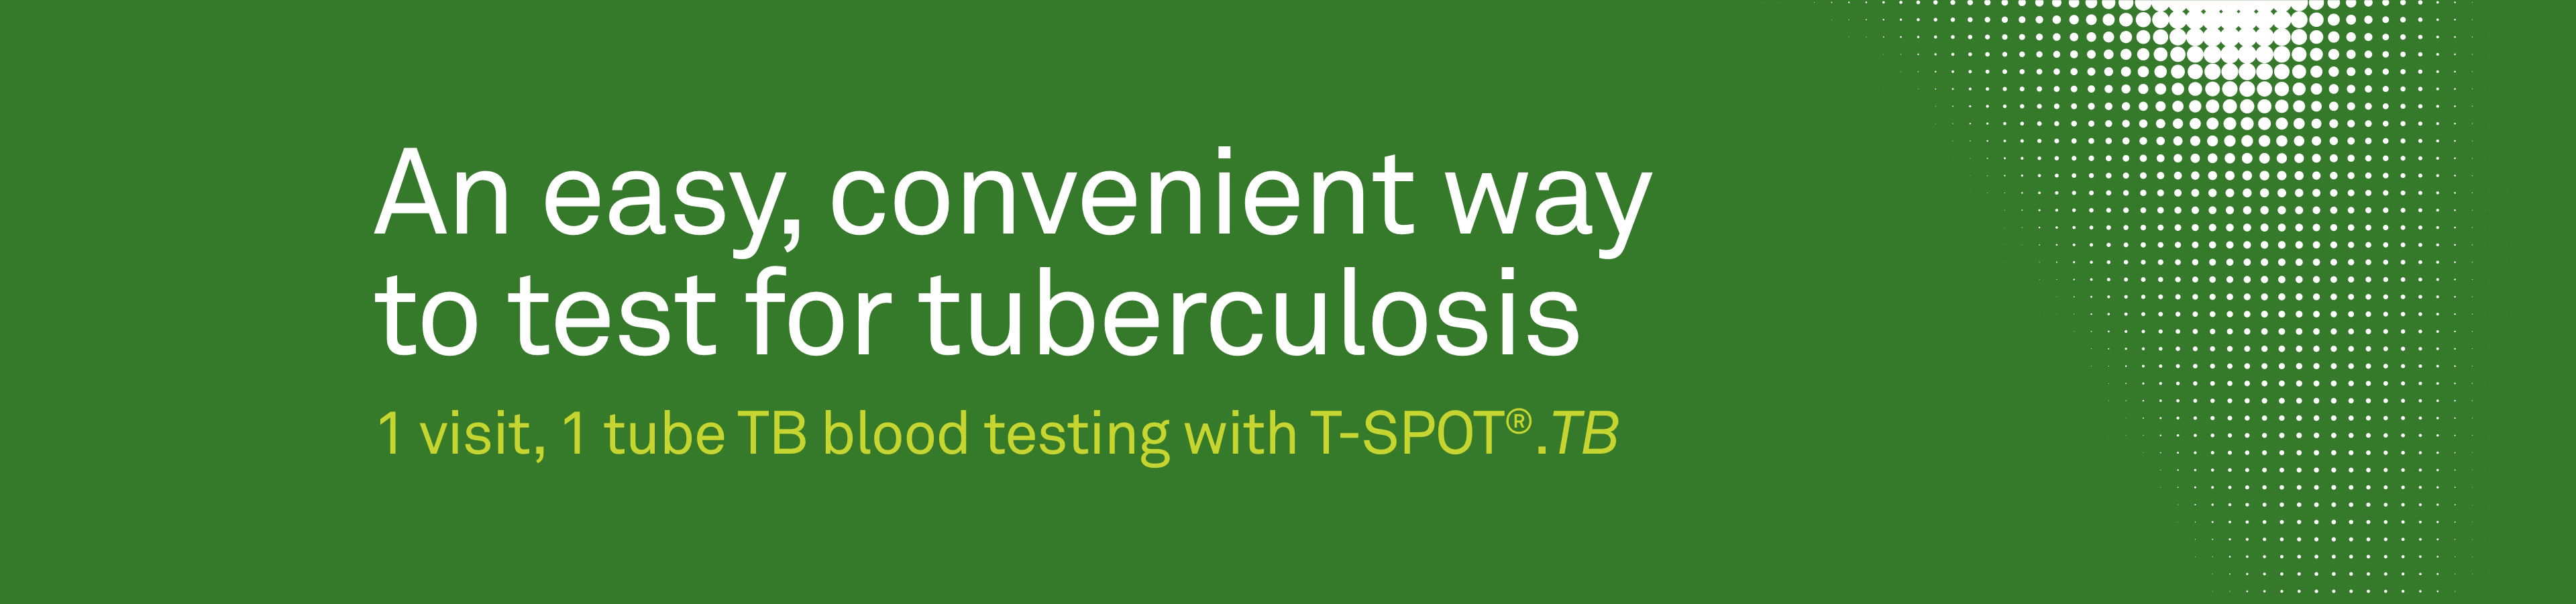 An easy, convenient way to test for tuberculosis: 1 visit, 1 tube TB blood testing with T-SPOT®.TB